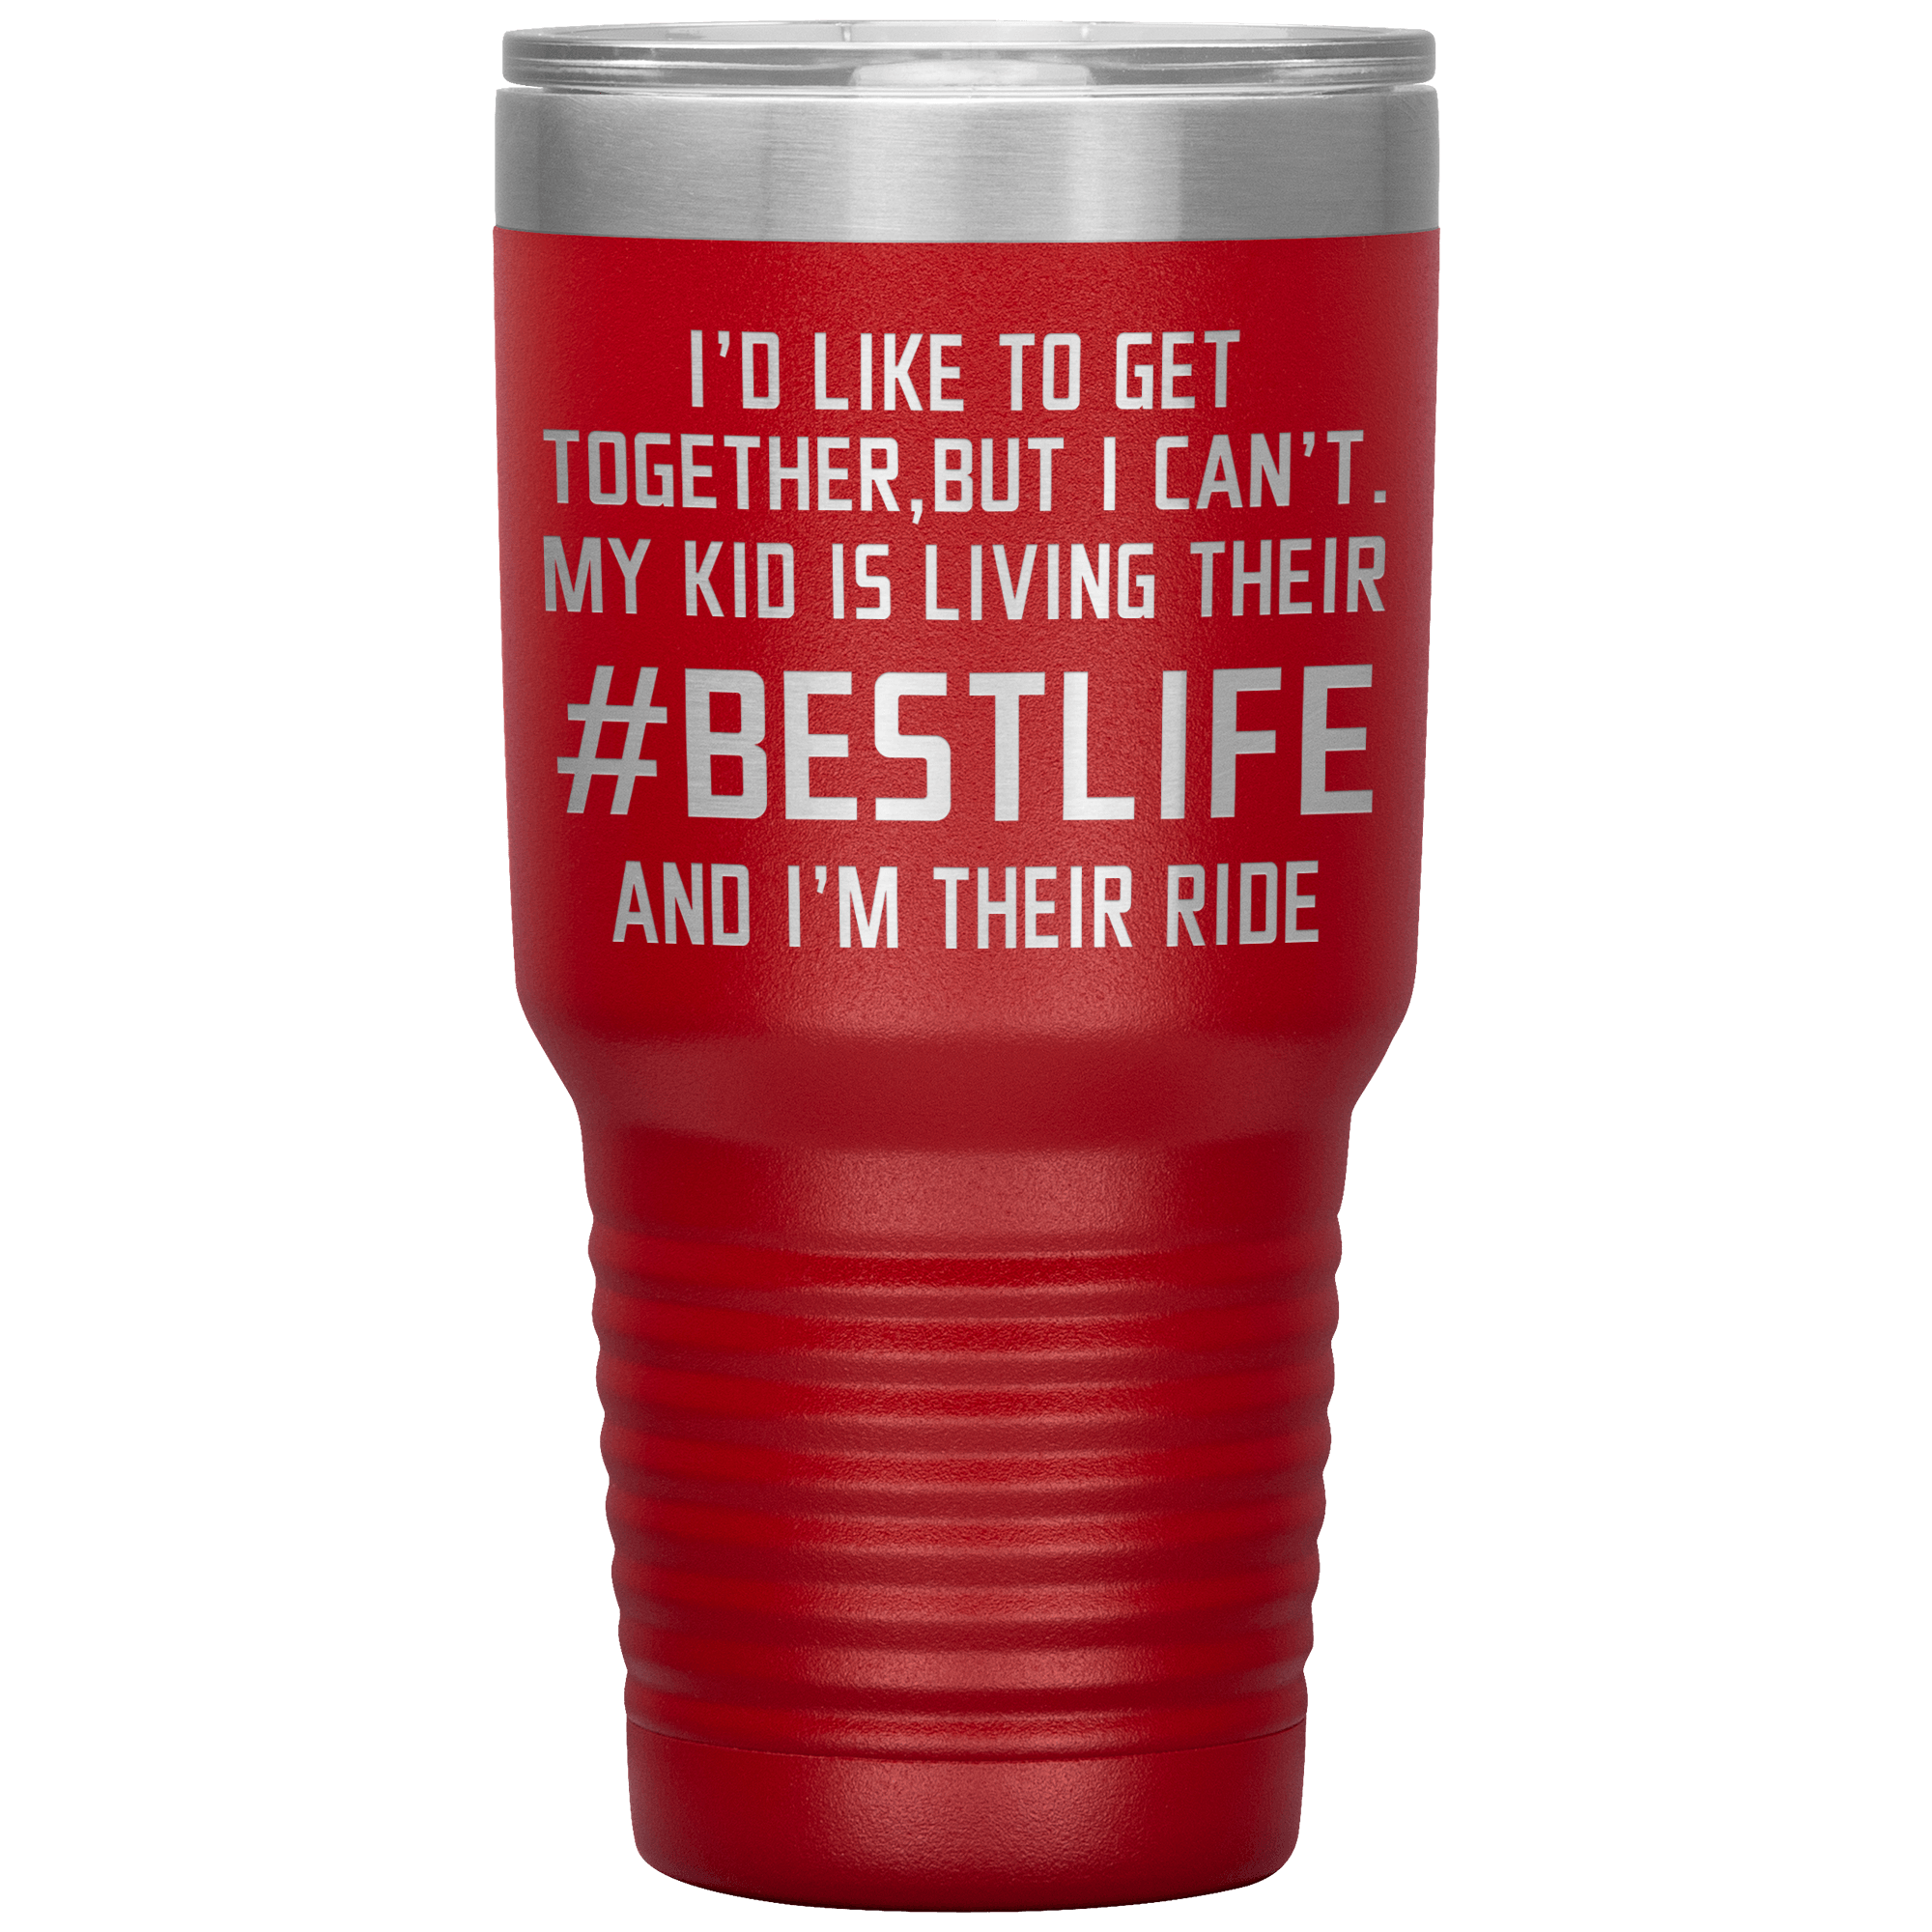 " MY KID IS LIVING THEIR BEST LIFE AND I'M THEIR RIDE " TUMBLER